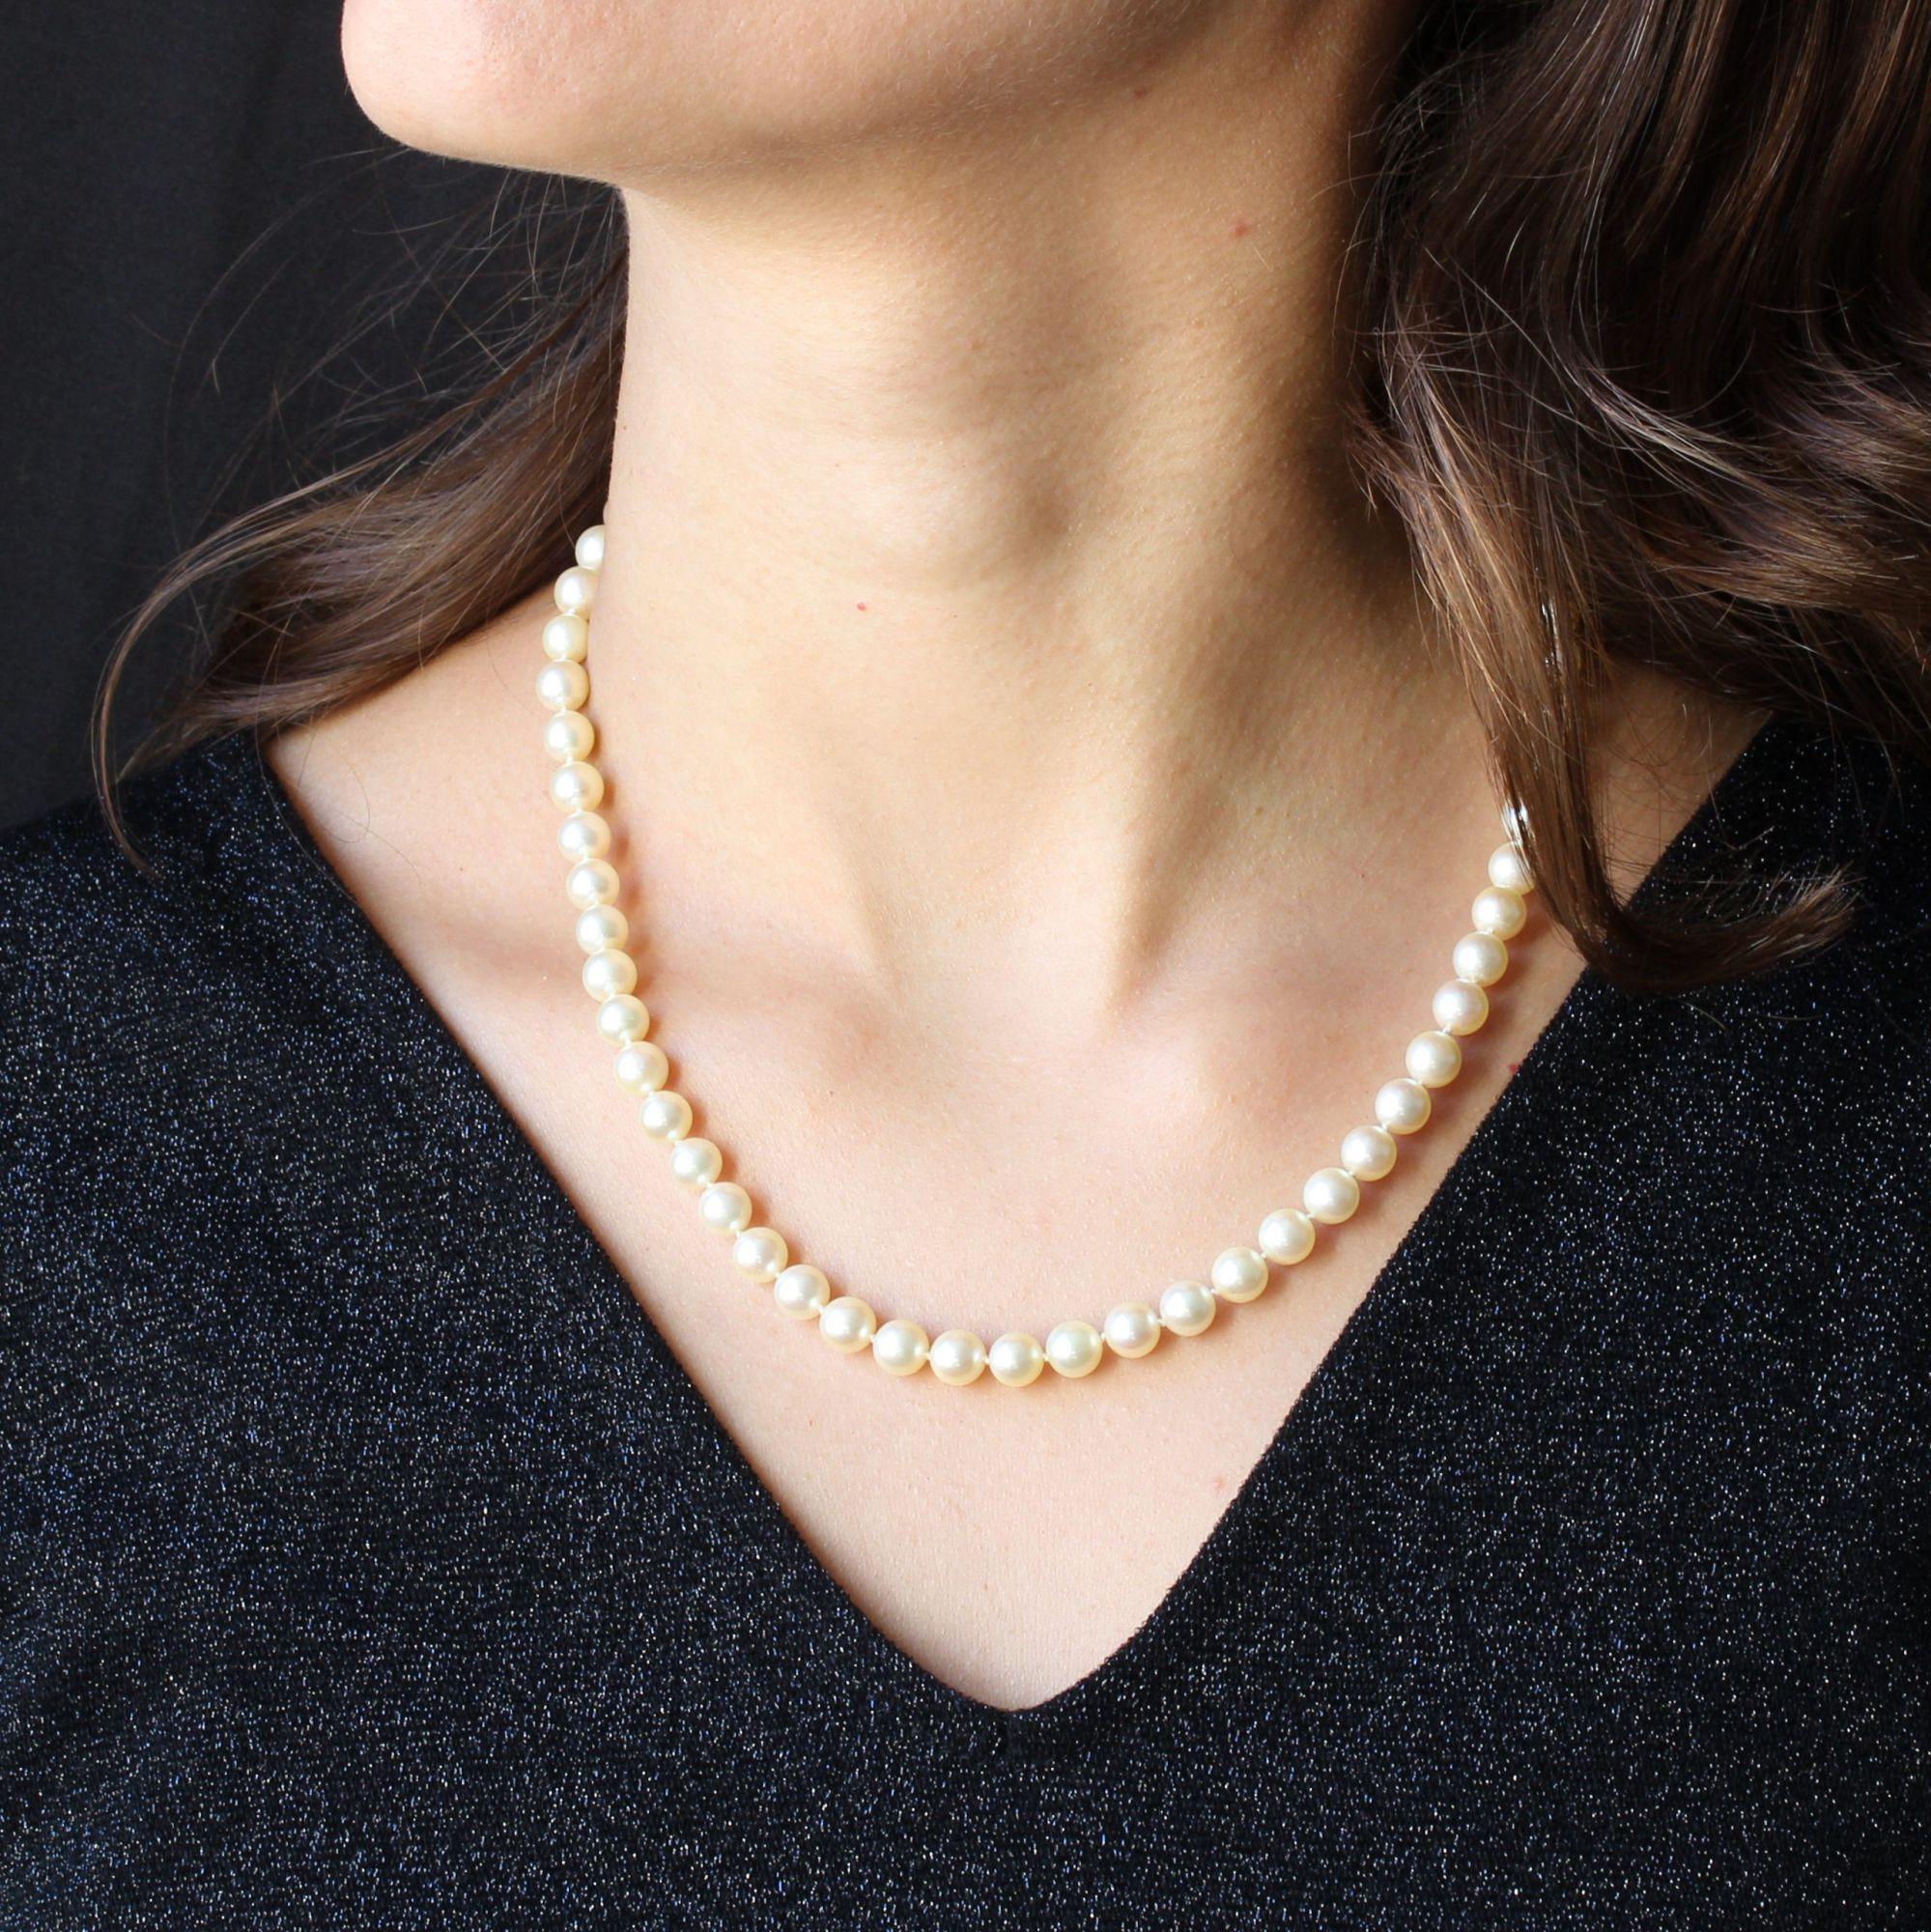 Choker necklace of cultured pearls, shaded white orient.
The clasp is a 18 karat yellow gold pearl, decorated with gadroons, ratchet with safety chain.
Diameter of the pearls : 6,5/7 mm.
Length : 46 cm.
Total weight of the jewel : 28,6 g